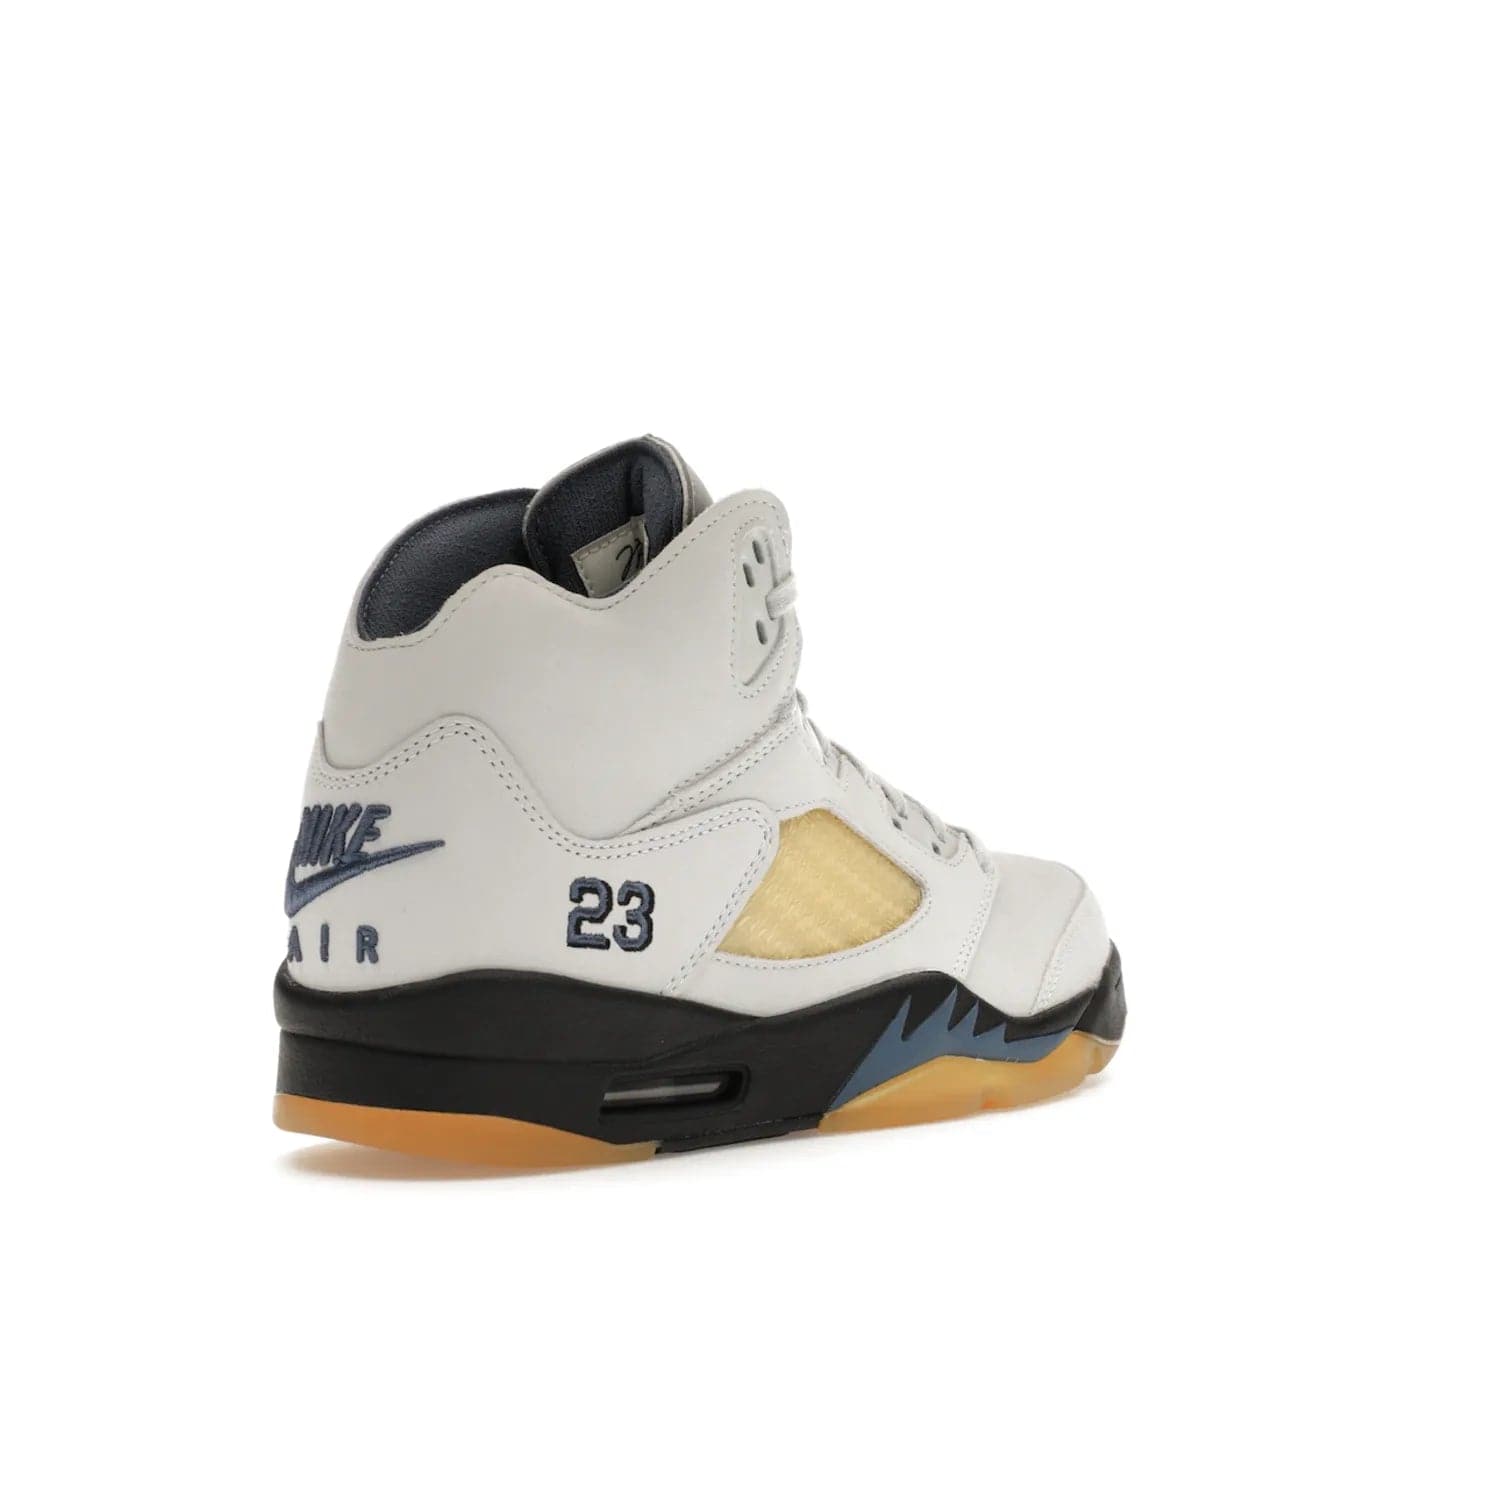 Jordan 5 Retro A Ma Maniére Dawn (Women's) - Image 32 - Only at www.BallersClubKickz.com - Catch the exclusive Air Jordan 5 Retro A Ma Maniére "Dawn" – a modern classic that combines elegance and street style. Get a gleaming metallic silver tongue, the iconic "23" heel, and signature shark teeth pattern. A Photon Dust/Black/Diffused Blue/Pale Ivory colorway, slimmed-down collar, and pre-yellowed quarter panel netting make this sneaker a must-have. Get your pair on November 17 and seize